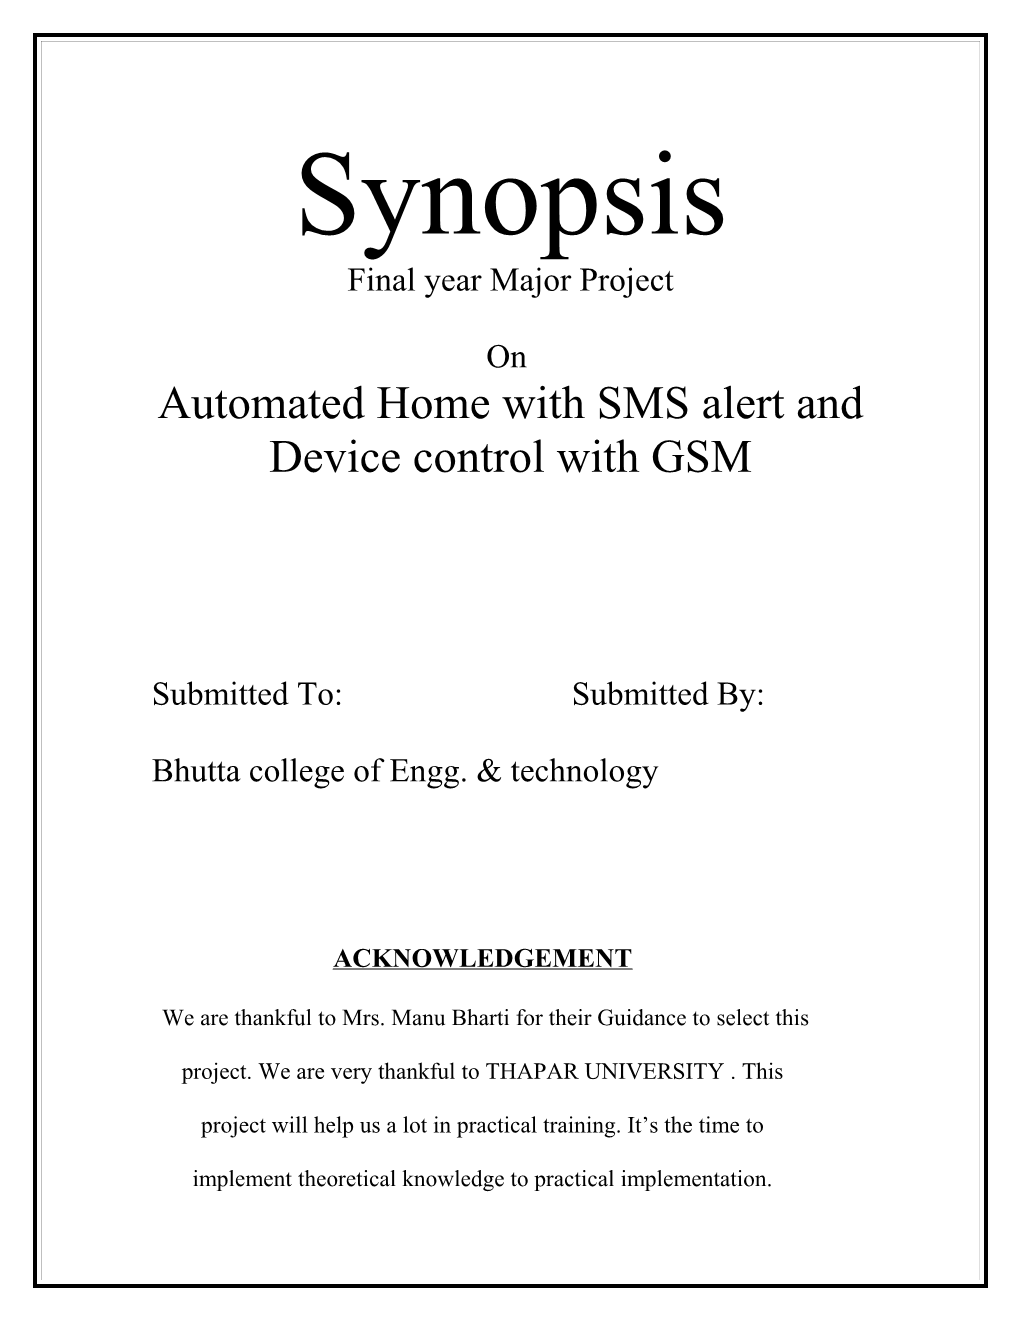 Automated Home with SMS Alert and Device Control with GSM